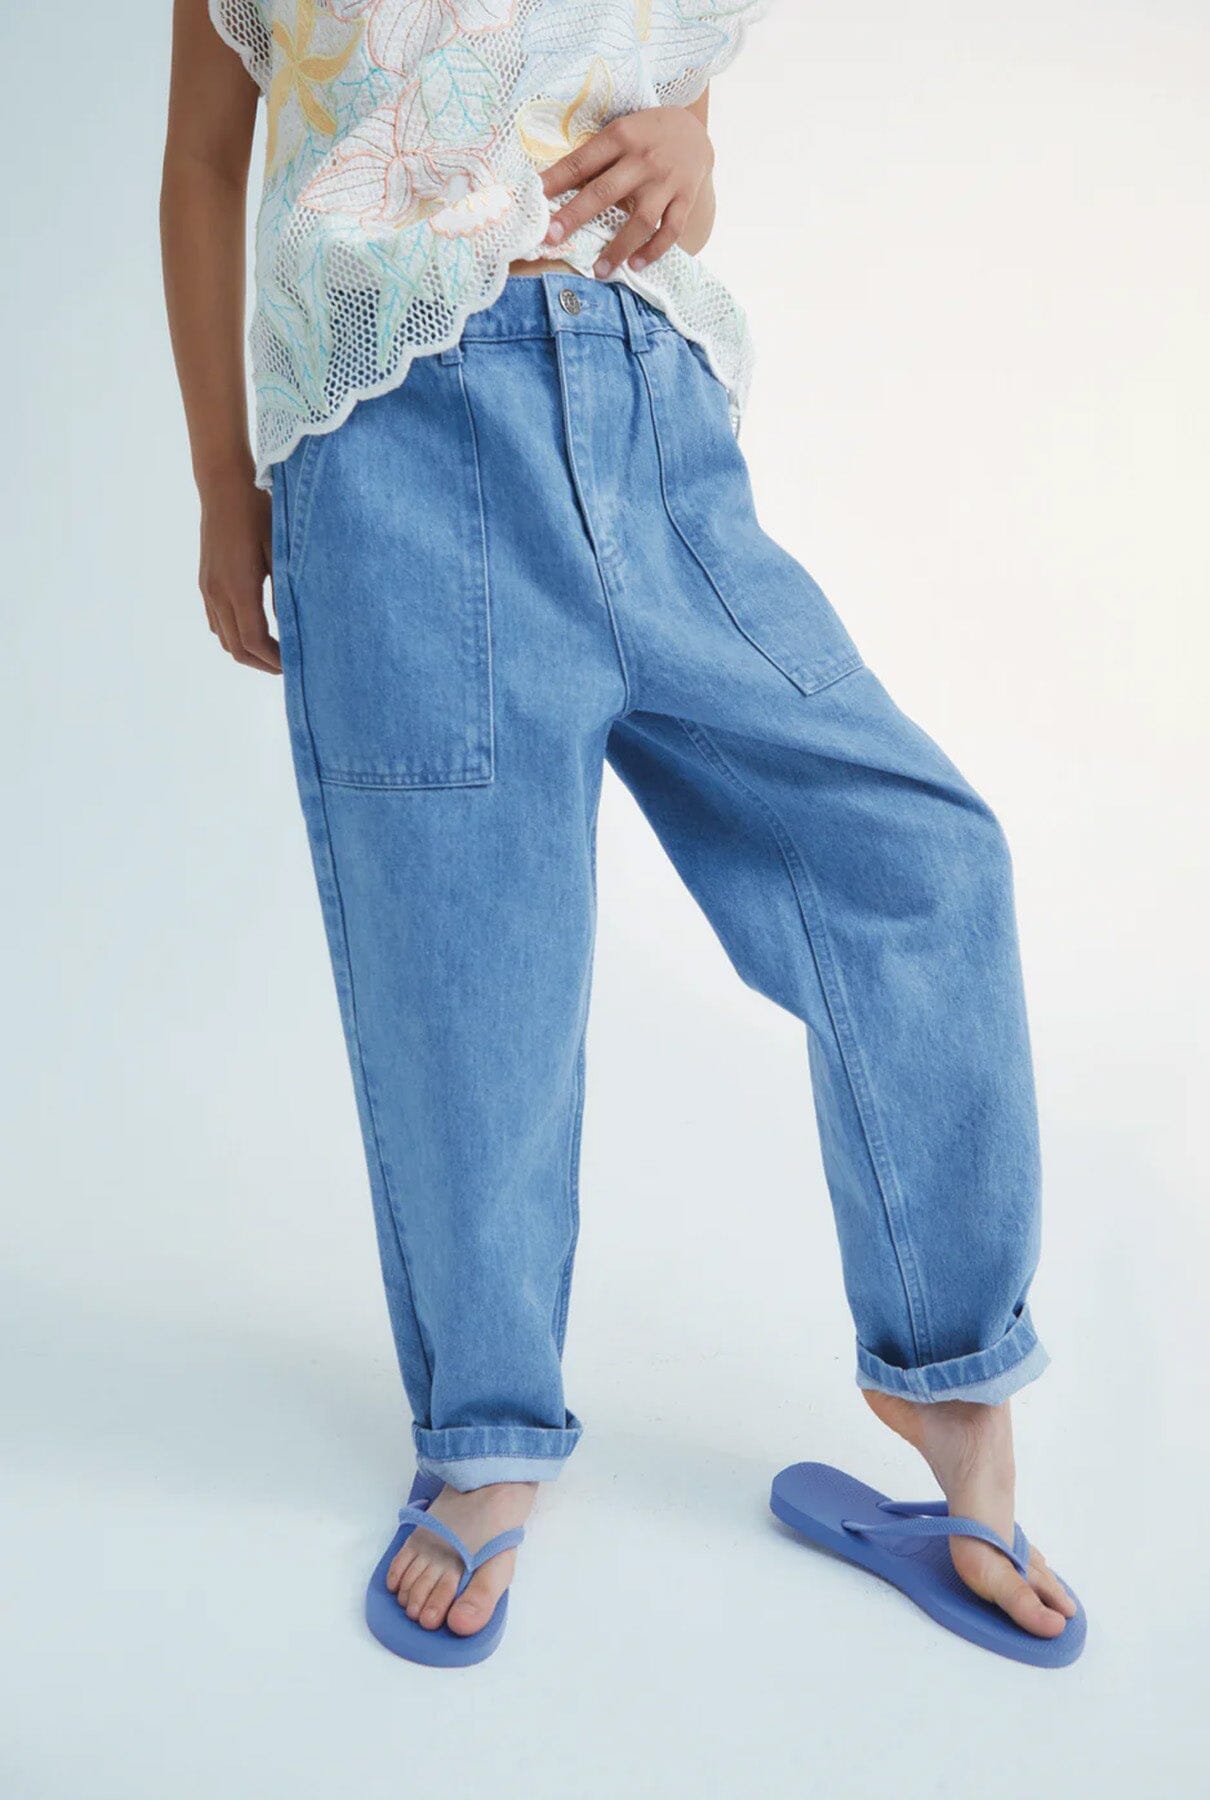 Woodland Denim Pant Patch Blue Denim Trousers The New Society 